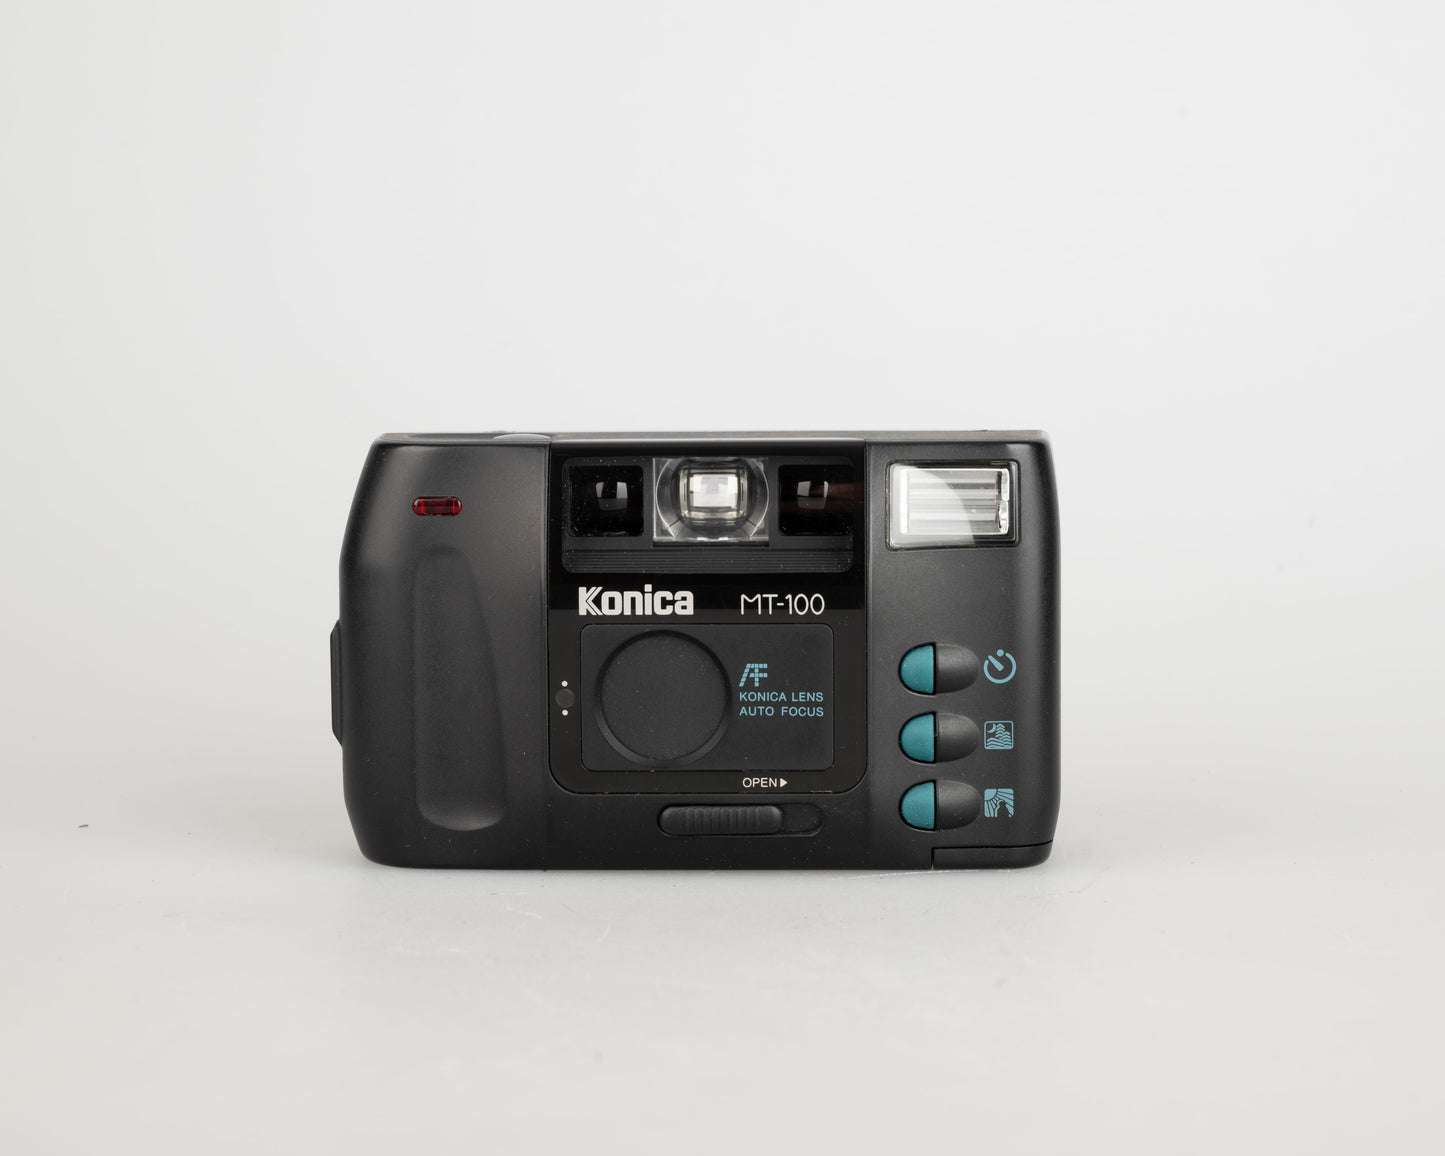 Konica MT-100 35mm point-and-shoot camera (serial 2417174)